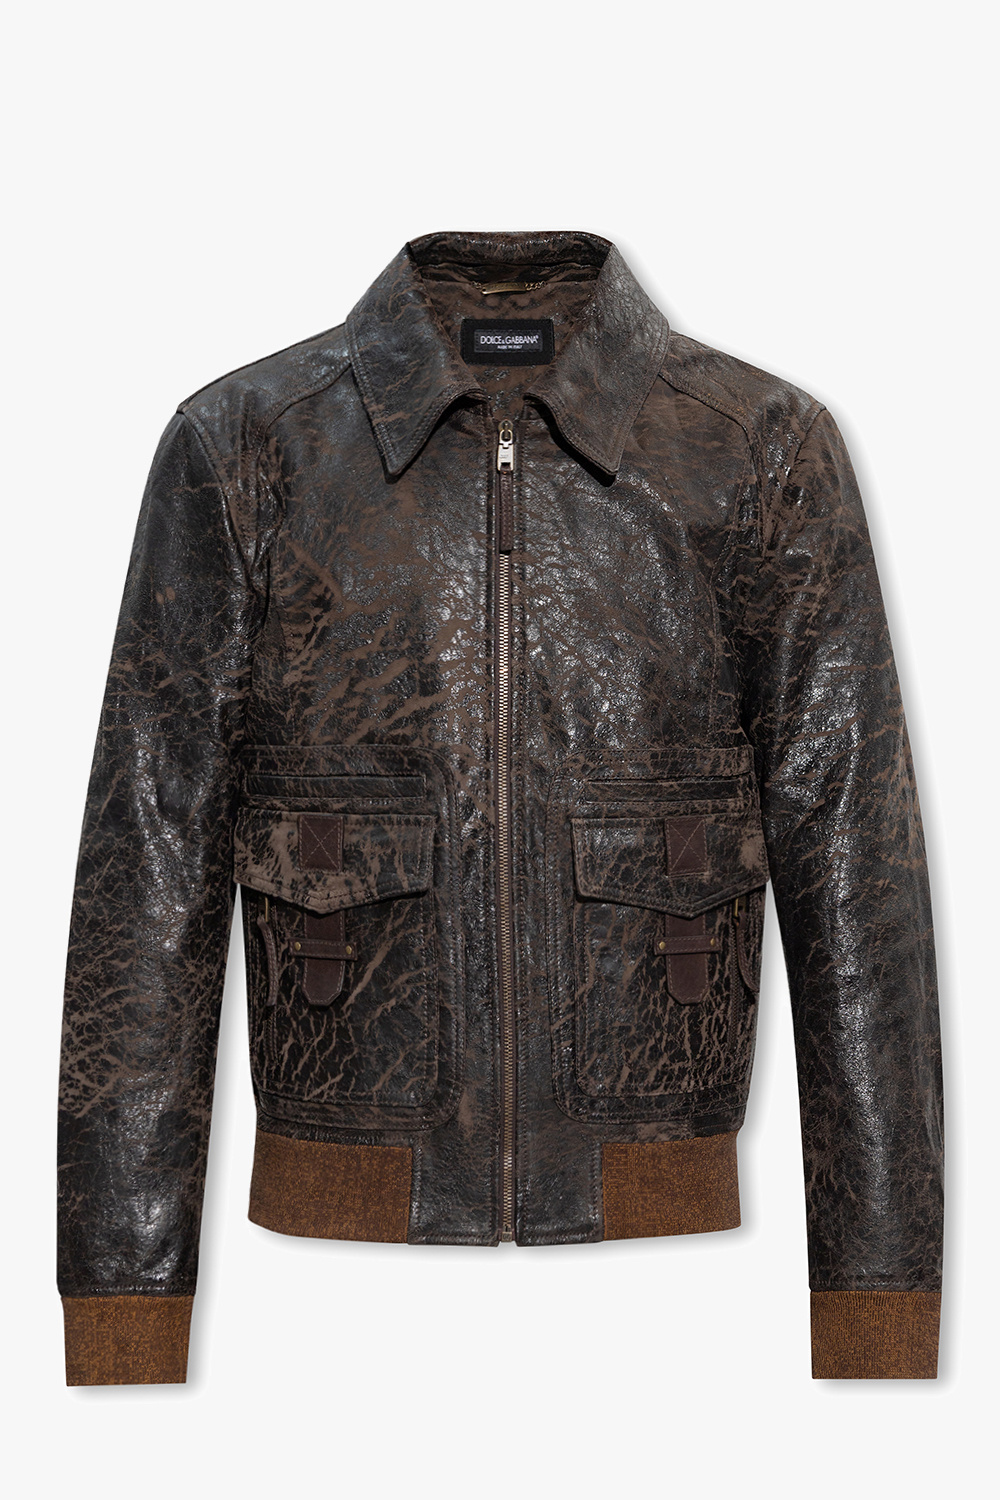 Dolce & Gabbana Jacket ‘RE-EDITION S/S 2008’ collection